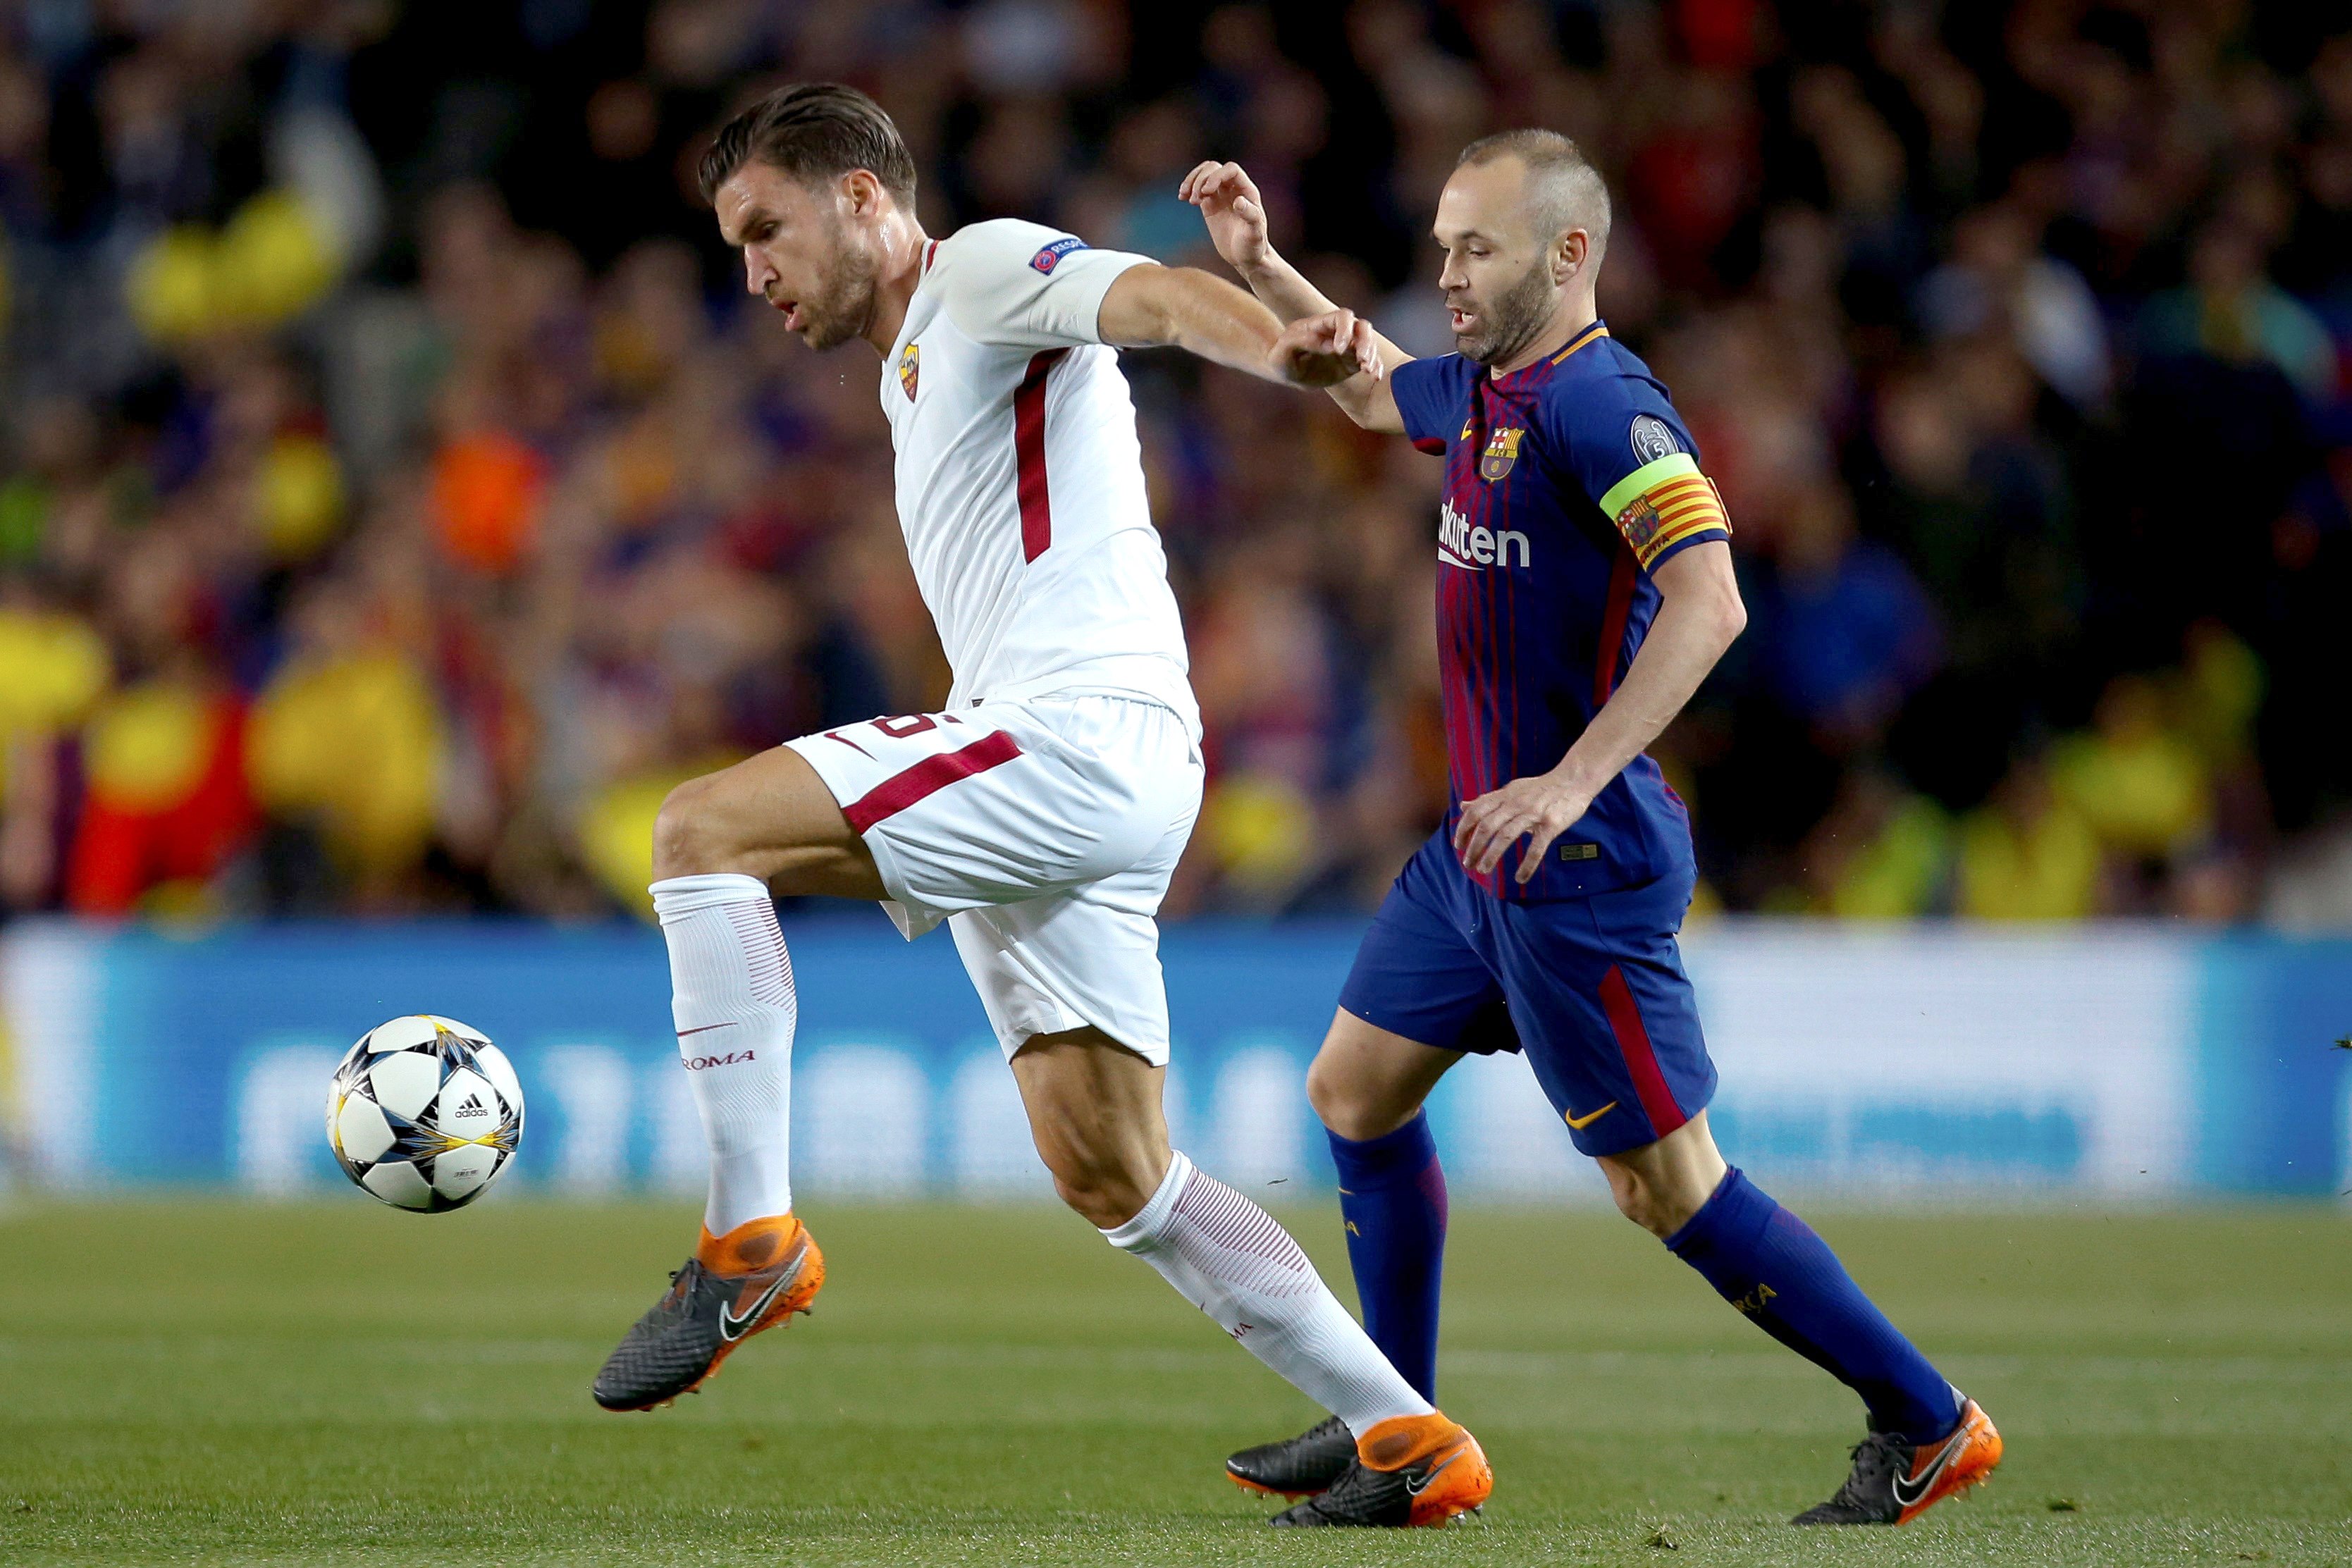 epa06645860 FC Barcelona's midfielder Andres Iniesta (R) and AS Roma's midfielder Kevin Strootman (L) in action during the UEFA Champions League quarter final first leg match between FC Barcelona and AS Roma at Camp Nou stadium, in Barcelona, Catalonia, Spain, 04 April 2018.  EPA/ENRIC FONTCUBERTA